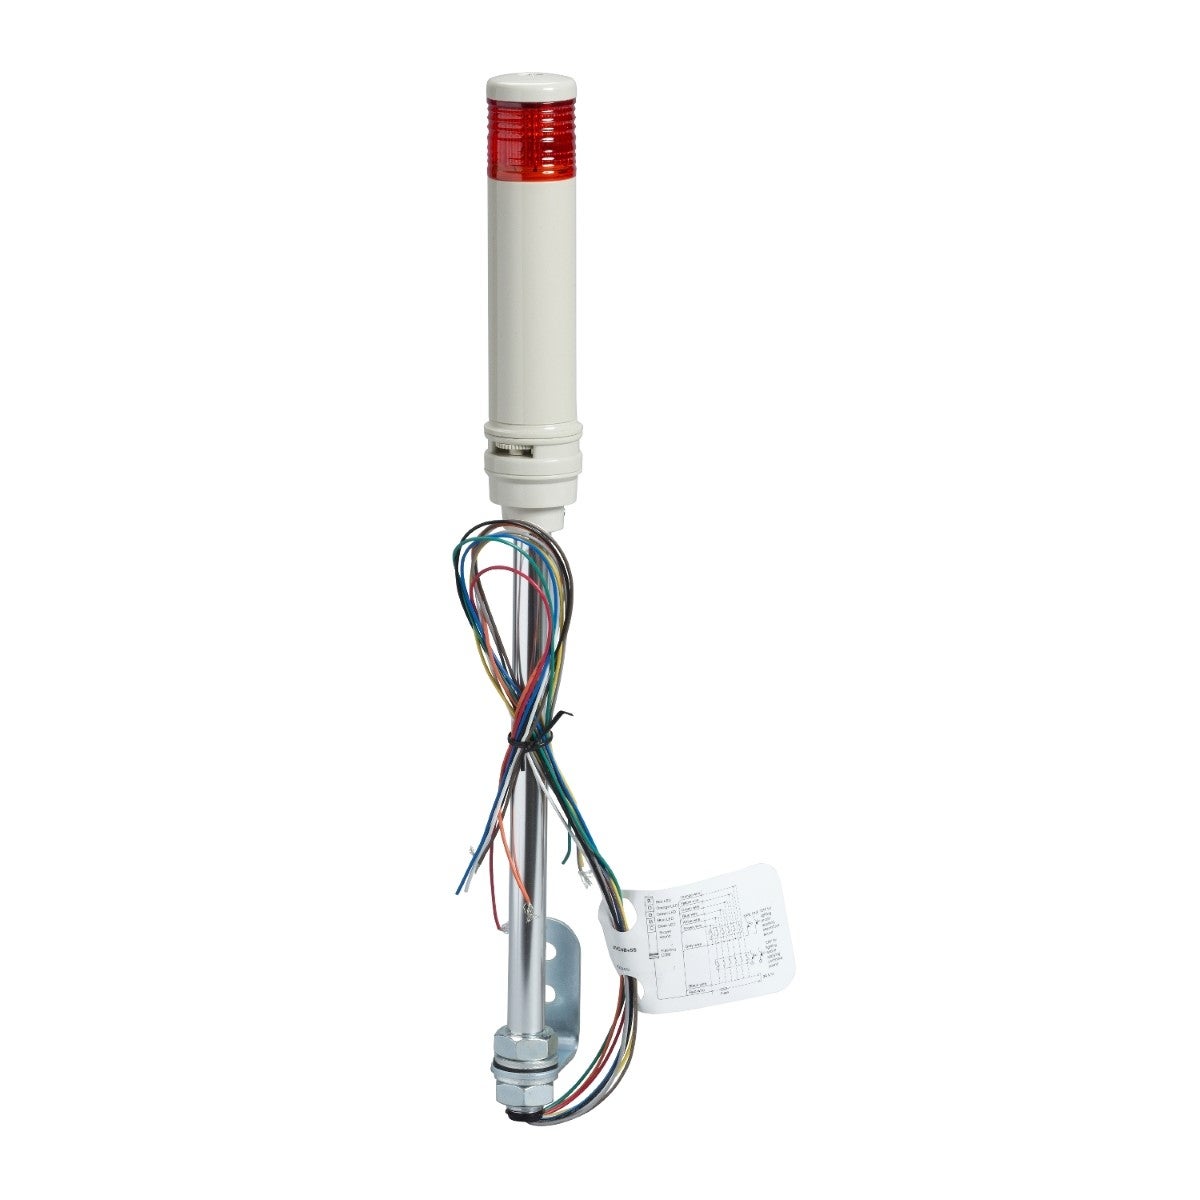 Harmony XVC, Monolithic precabled tower light, plastic, red, Ø40, tube mounting, steady or flashing, buzzer, IP23, 24 V AC/DC